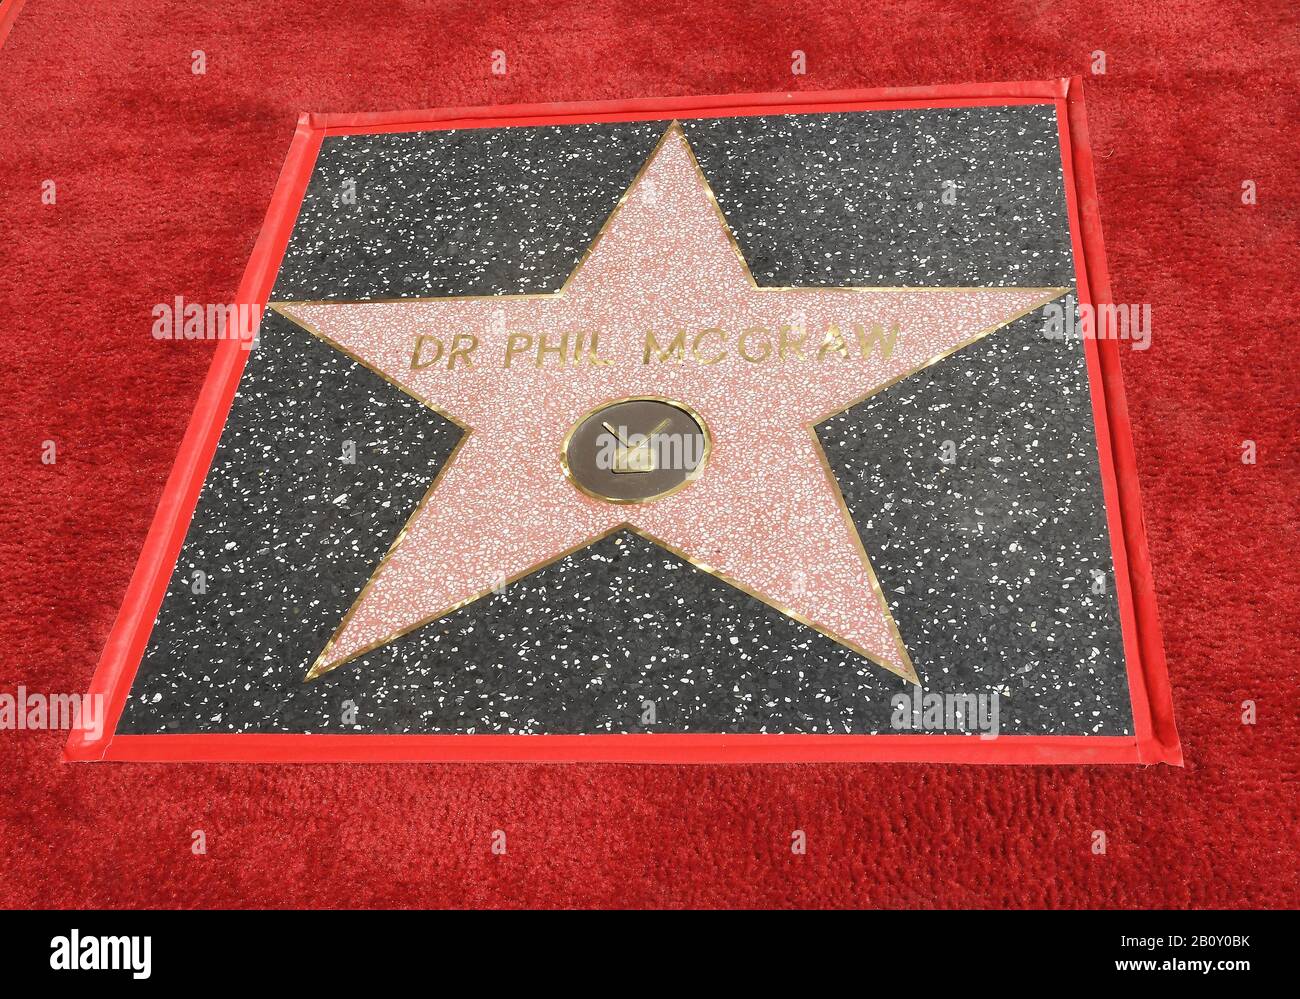 Dr. Phil McGraw Honored With Star On The Hollywood Walk Of Fame Ceremony held in front of the Eastown Development in Hollywood, CA on Friday, February 21, 2020 (Photo By Sthanlee B. Mirador/Sipa USA) Stock Photo